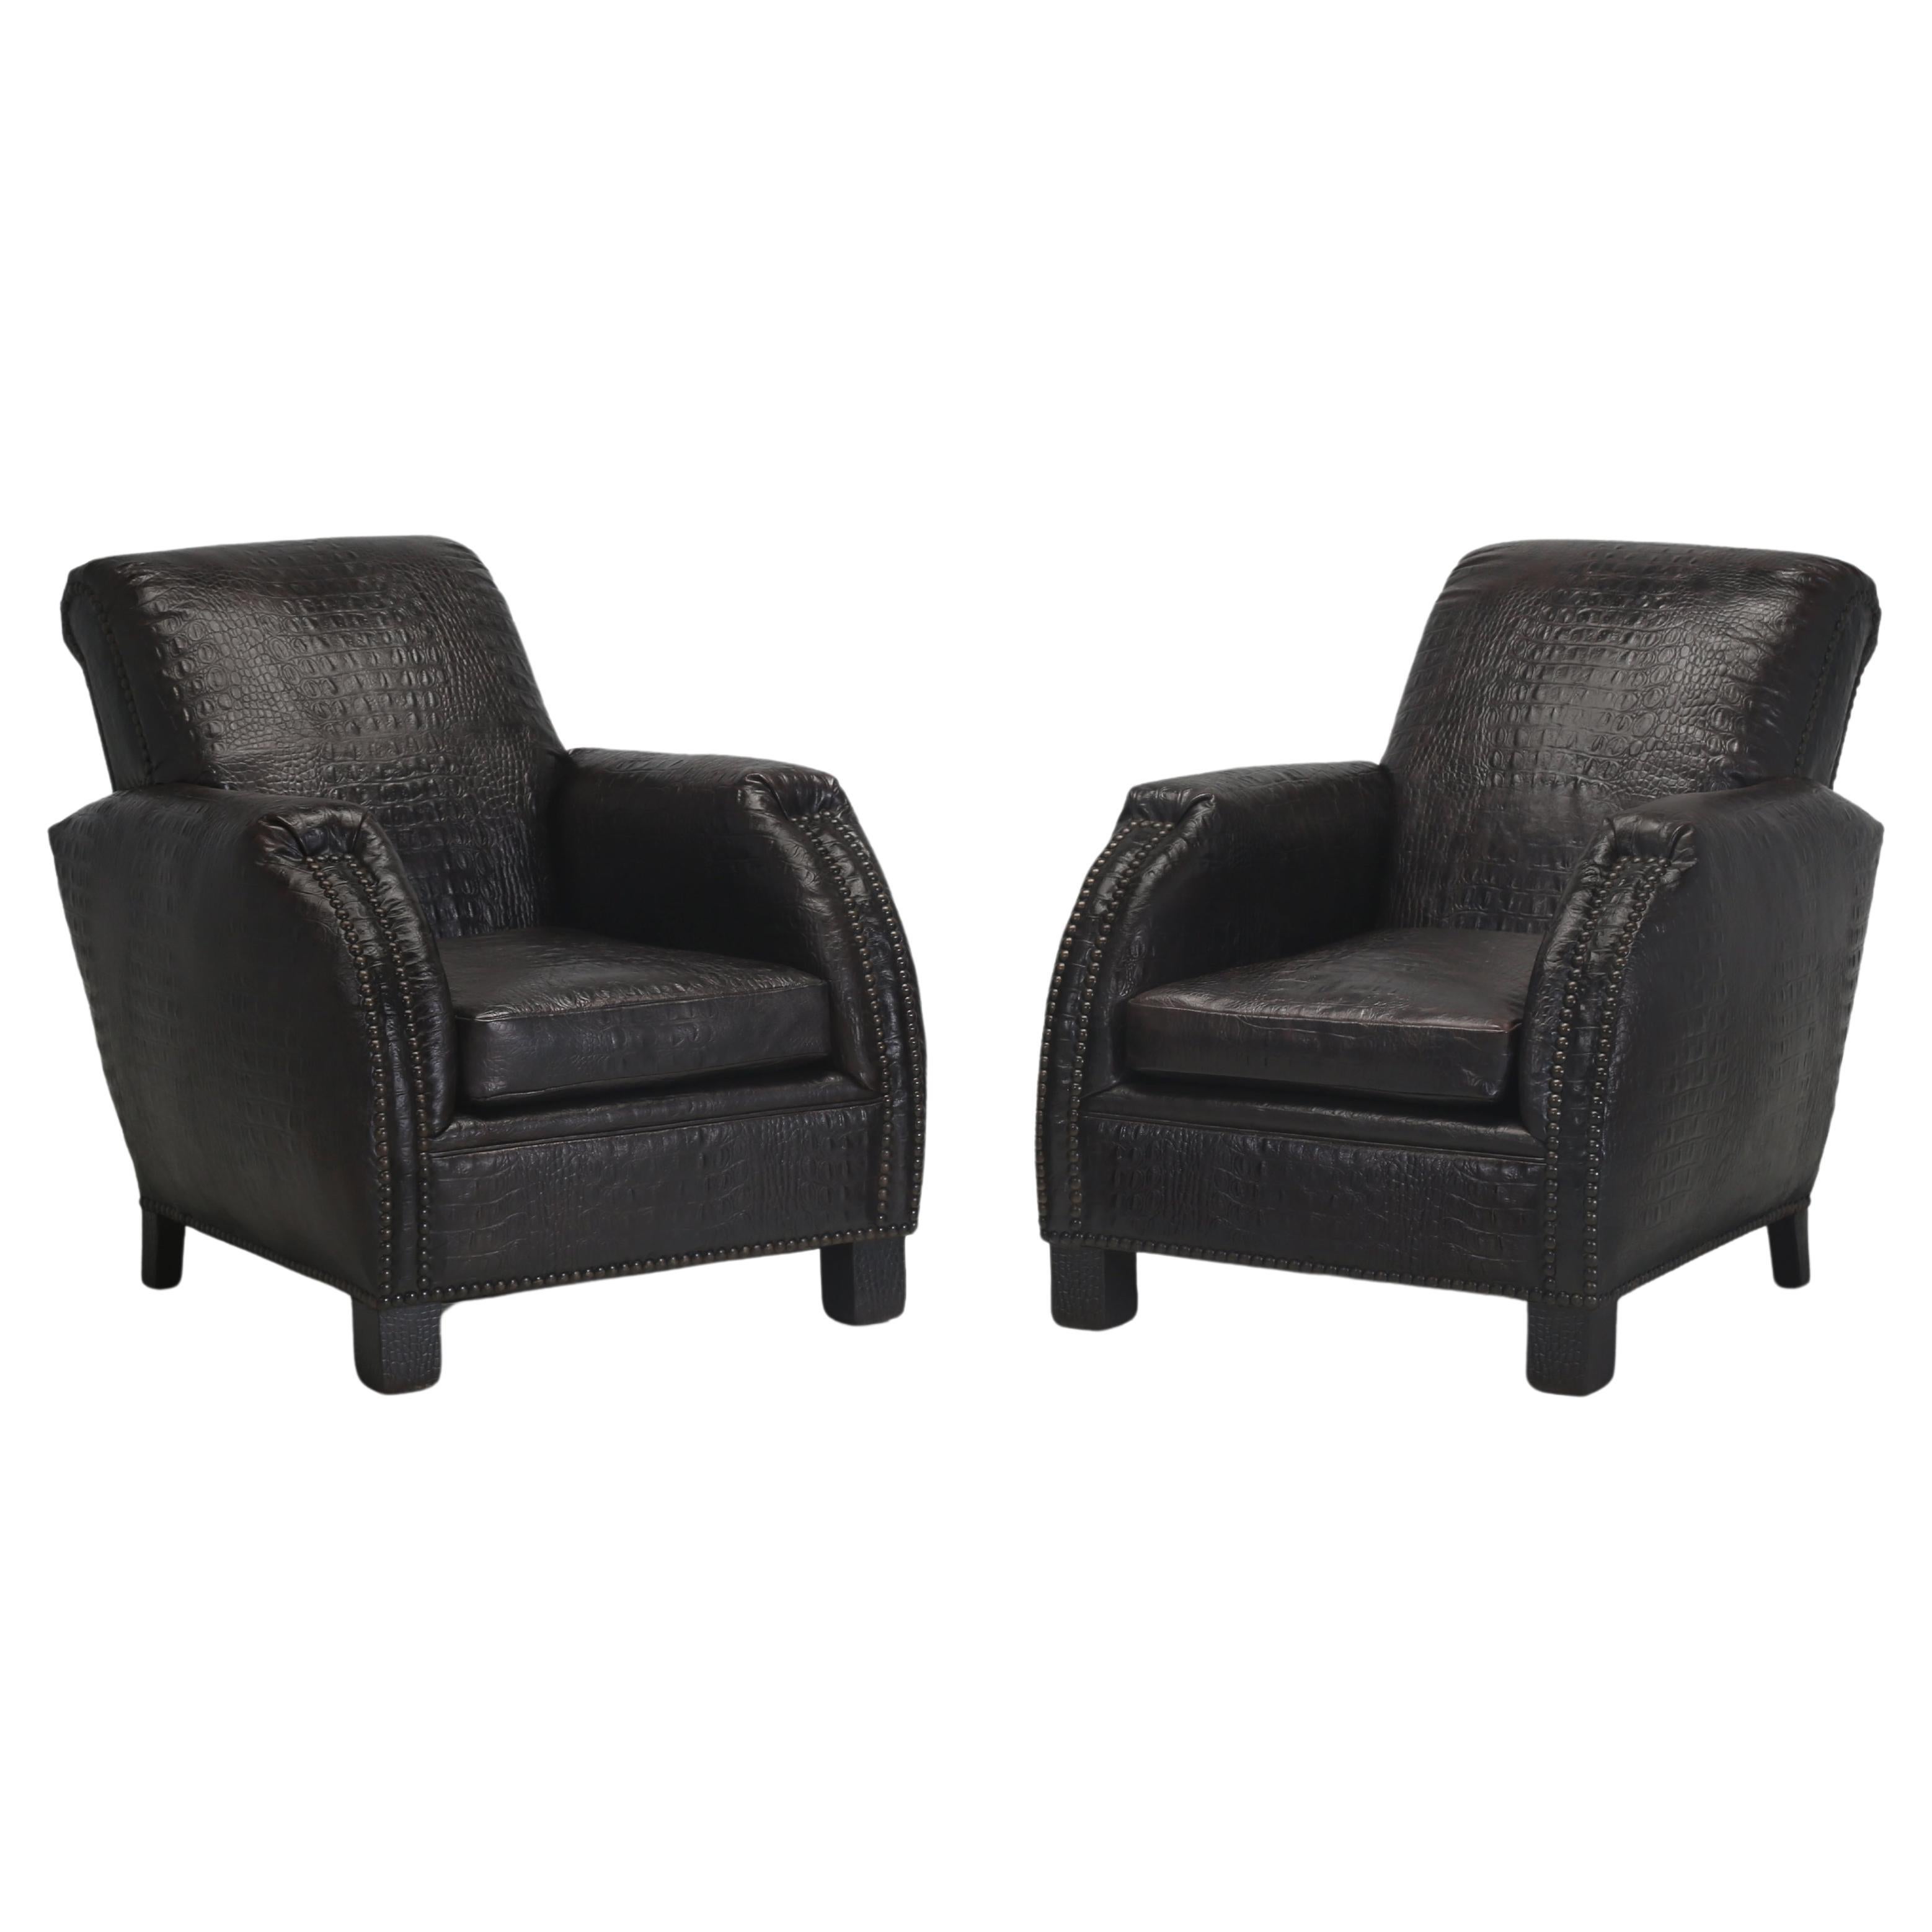 Pair of French Art Deco Leather Club Chairs covered in a Faux Crocodile Leather.